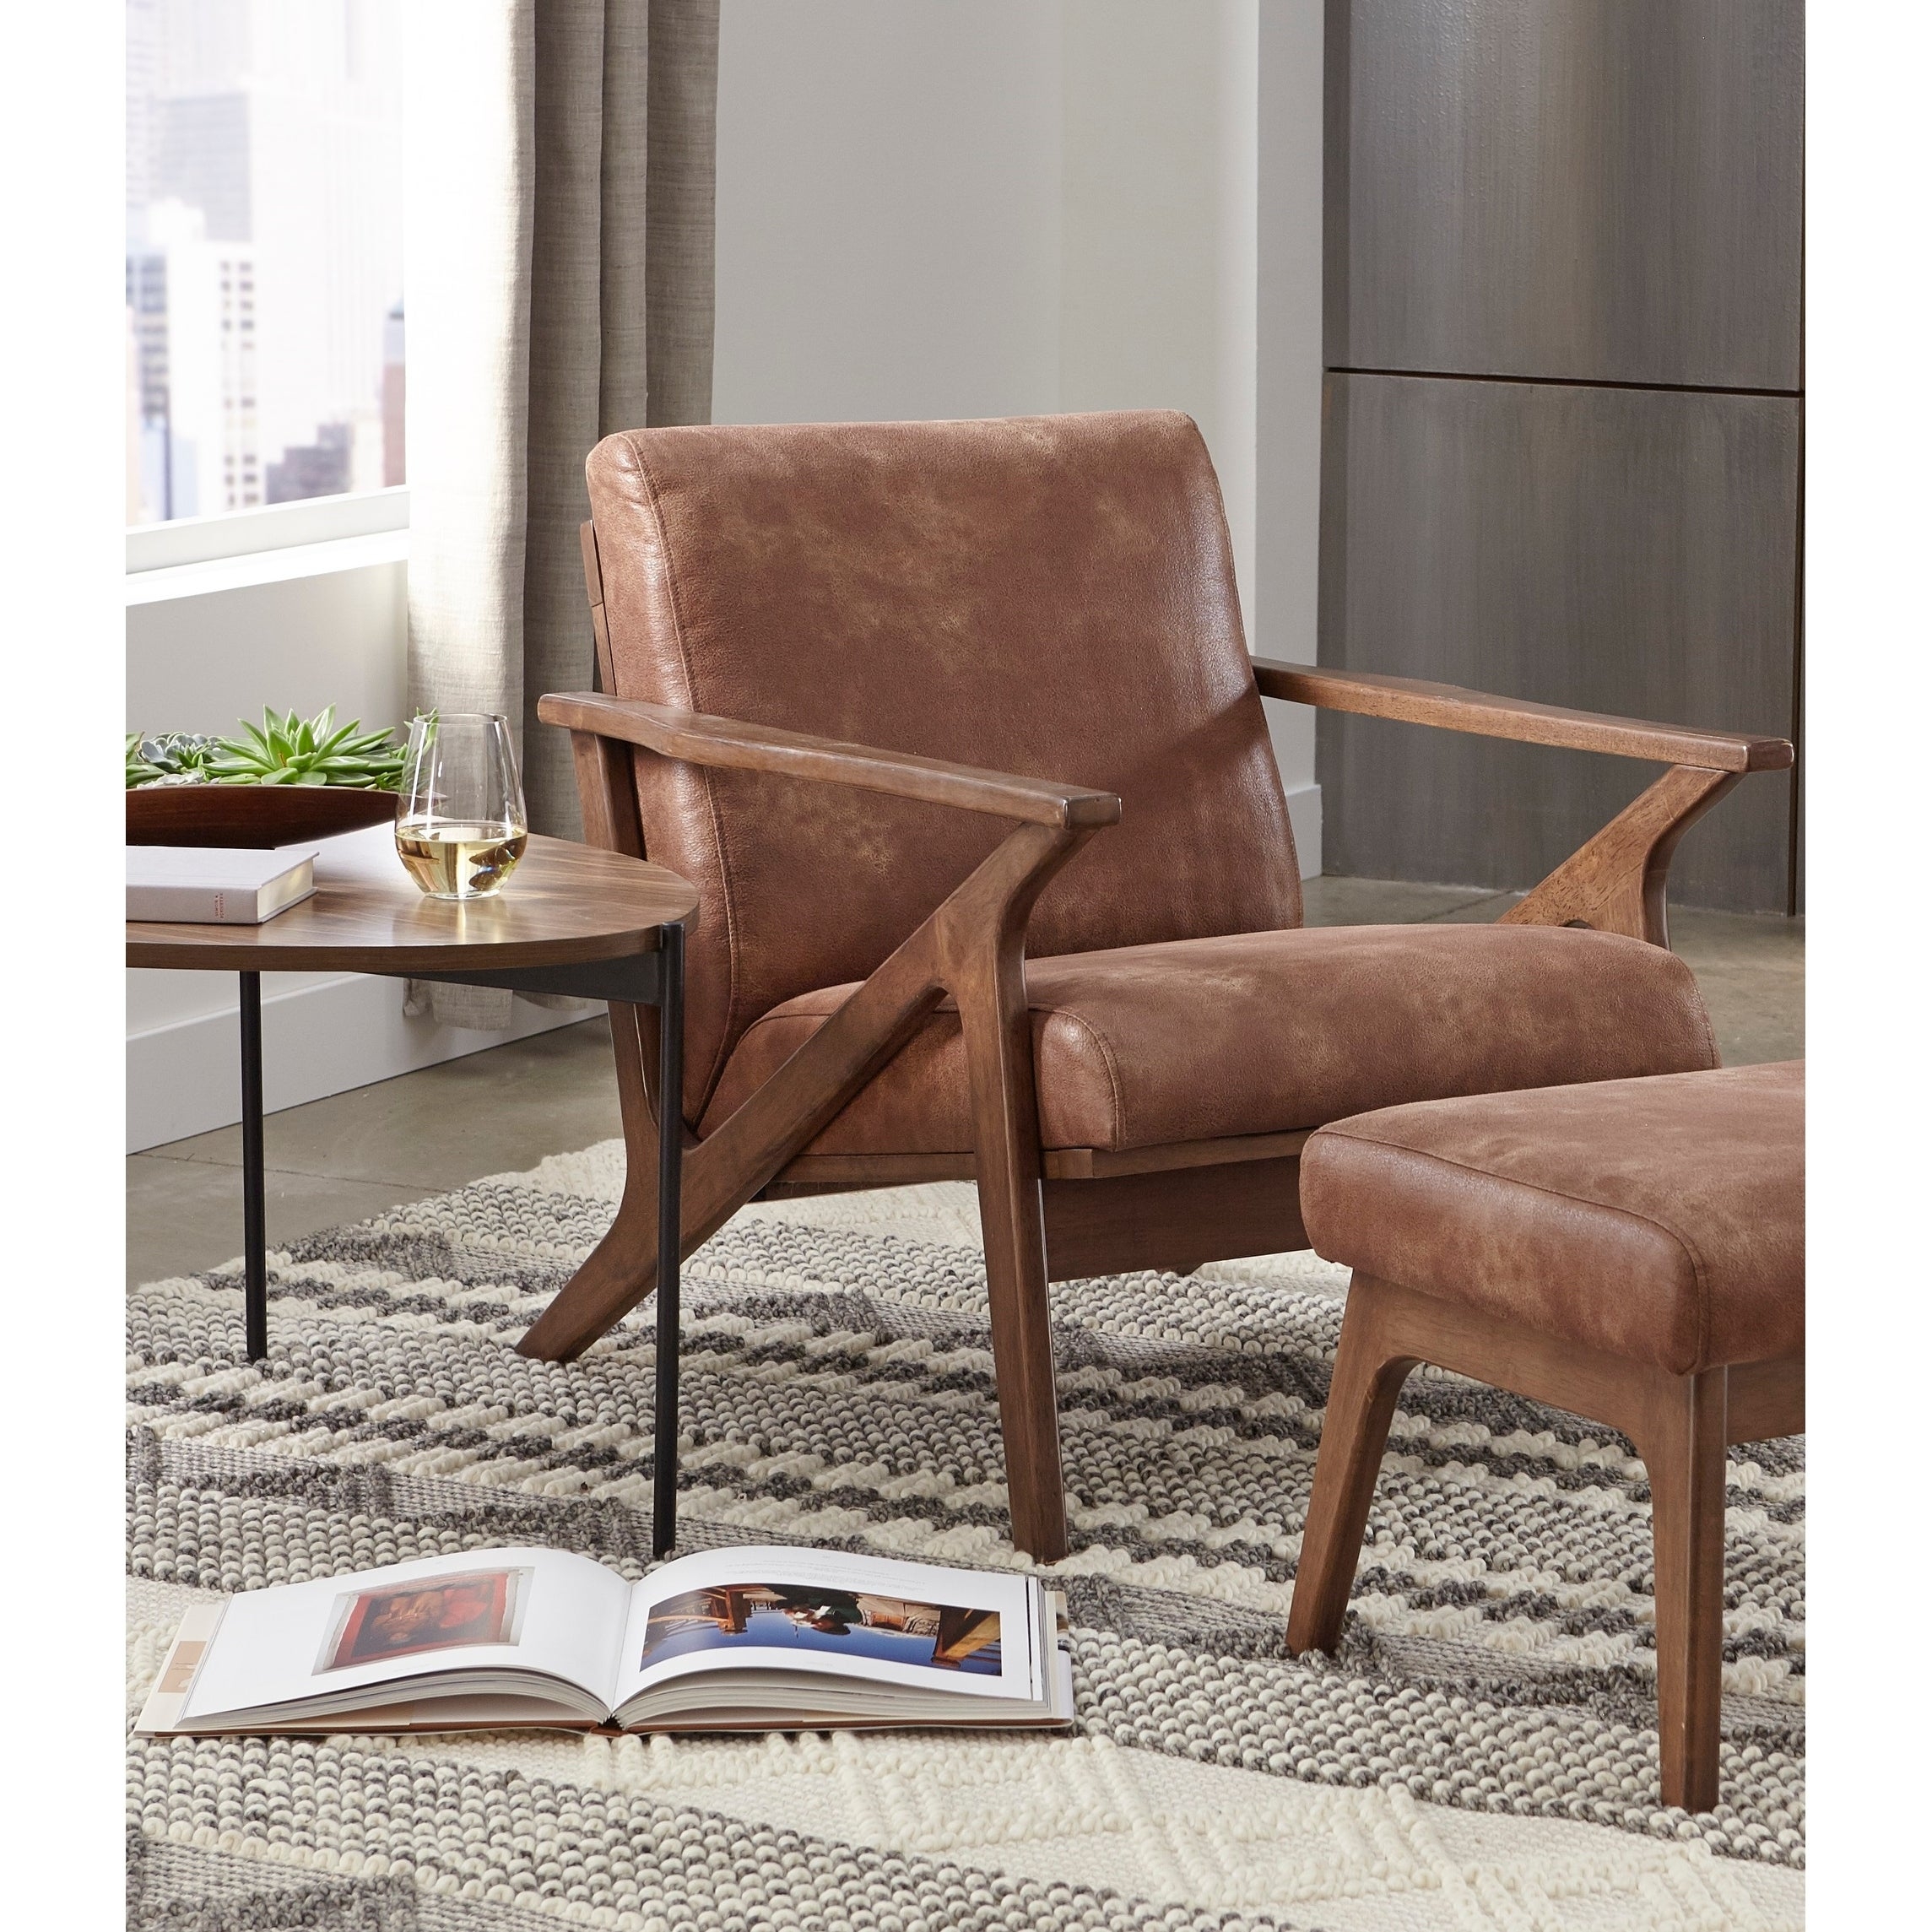 Simple Living Bianca Mid-century Solid Wood Chair - Camel Brown - Image 0